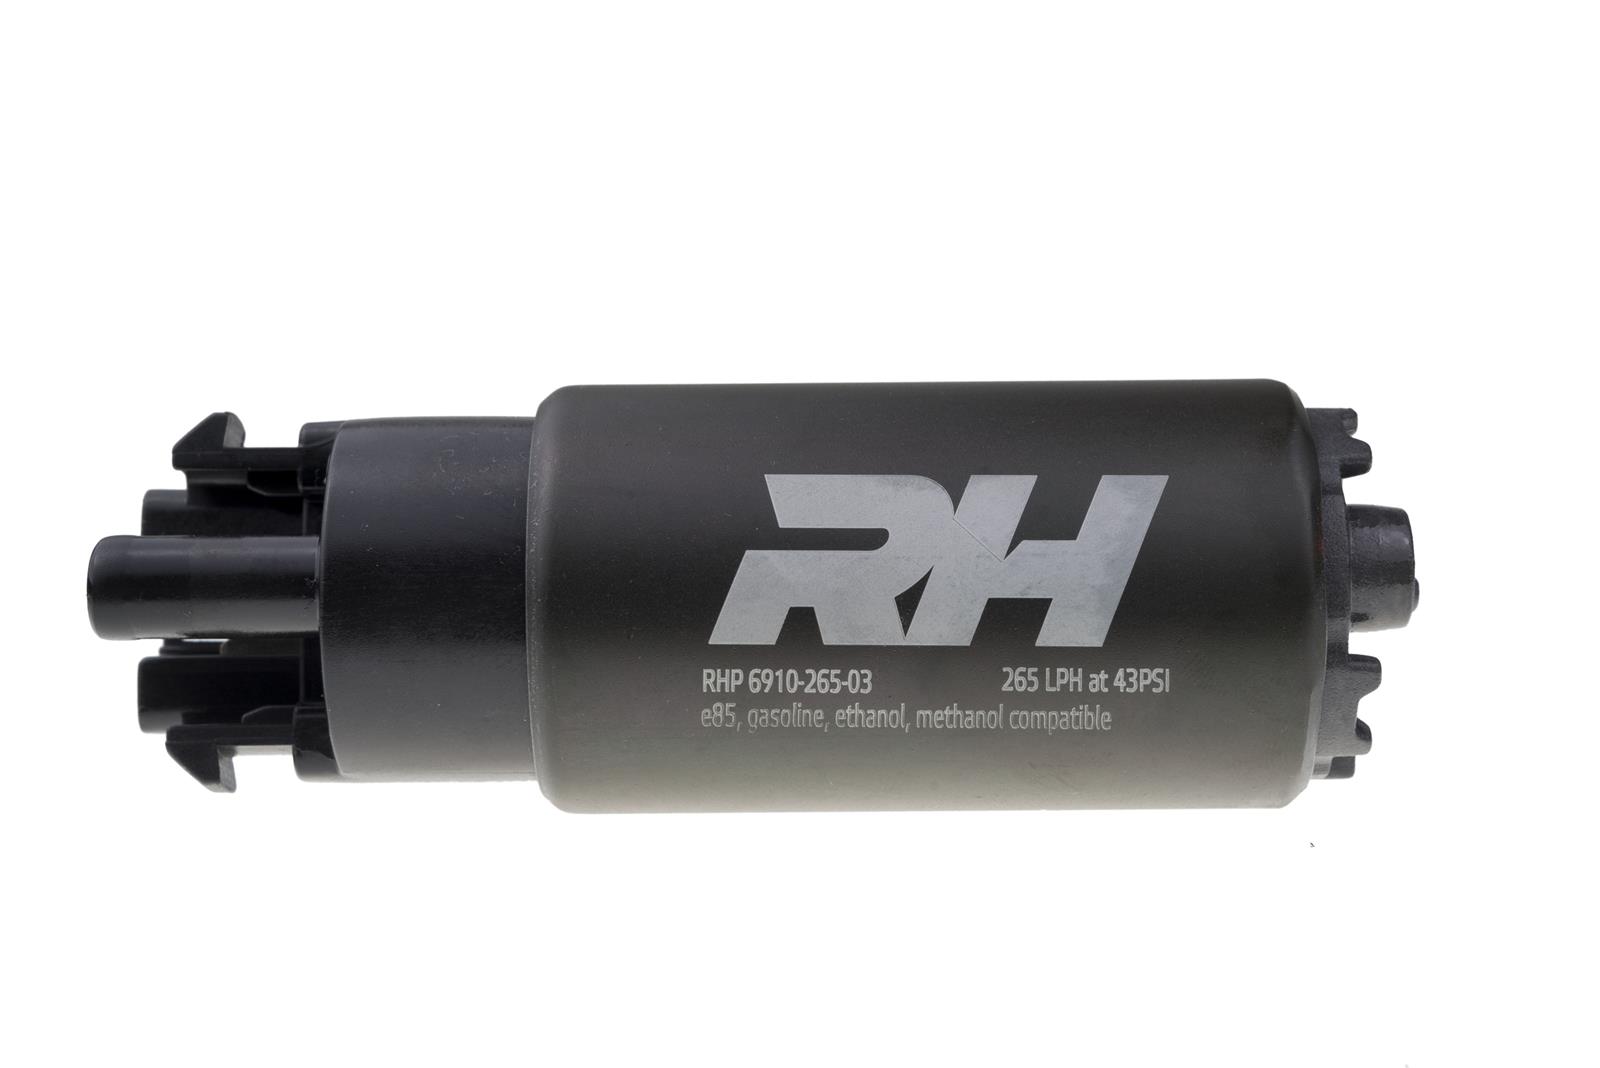 Redhorse Performance 6910-265-03 E85 Compatable In Tank Fuel Pump 265 LPH - Offset Inlet, Inline